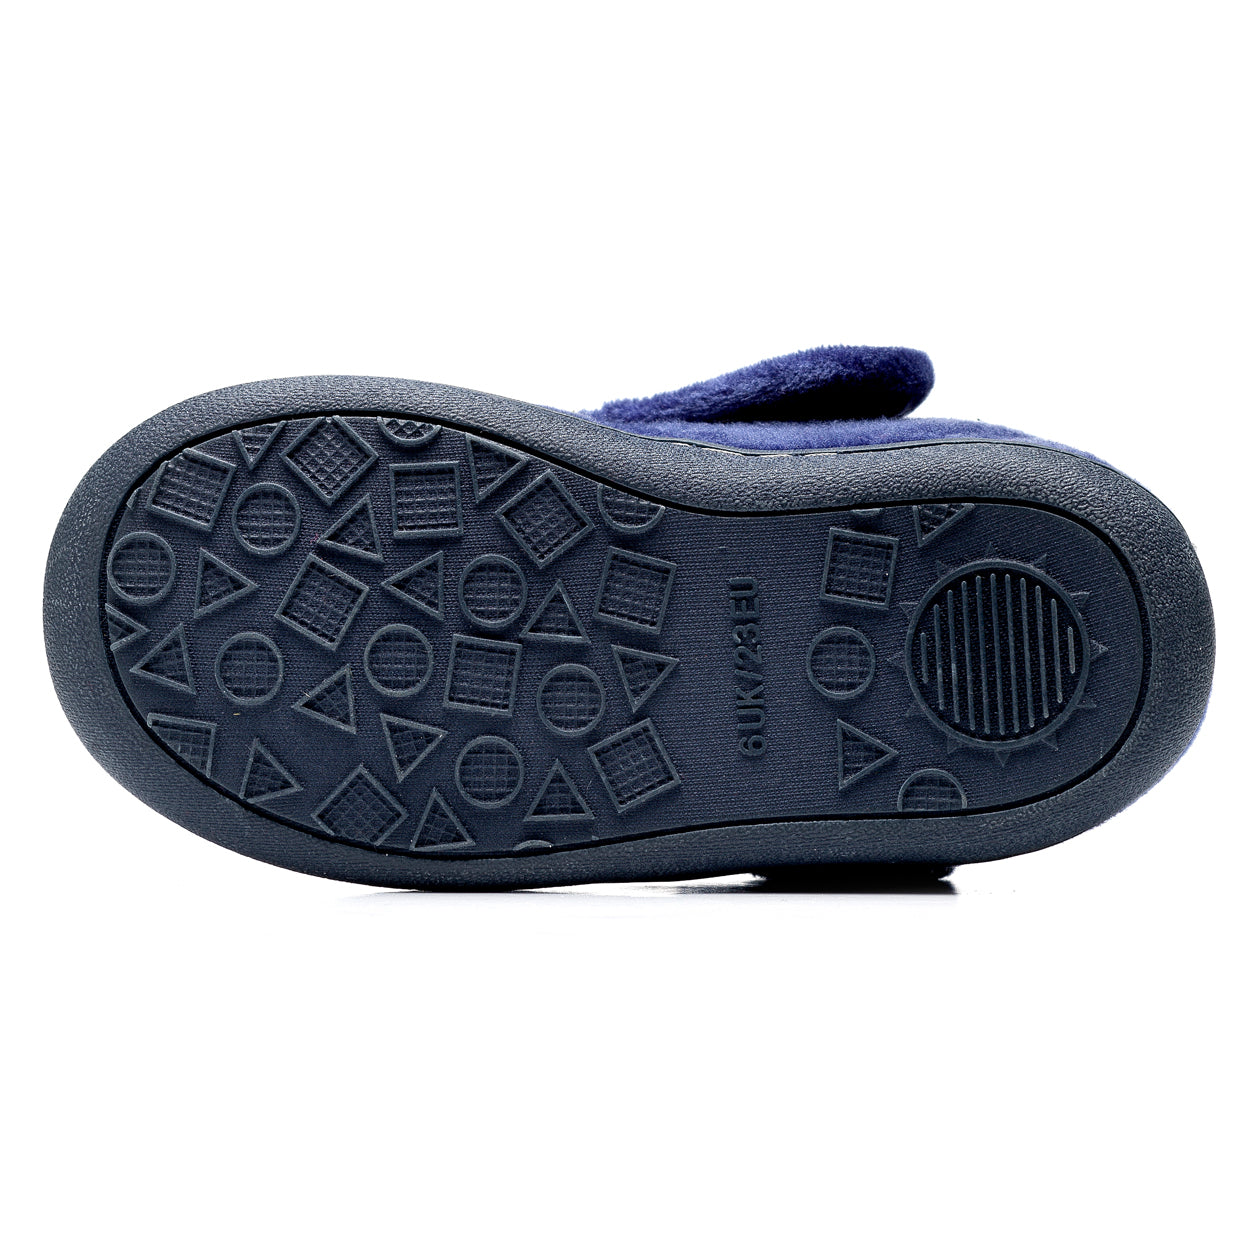 A pair of boys slippers by Chipmunks, style Blast, in navy multi with rocket design and velcro fastening. View of sole.